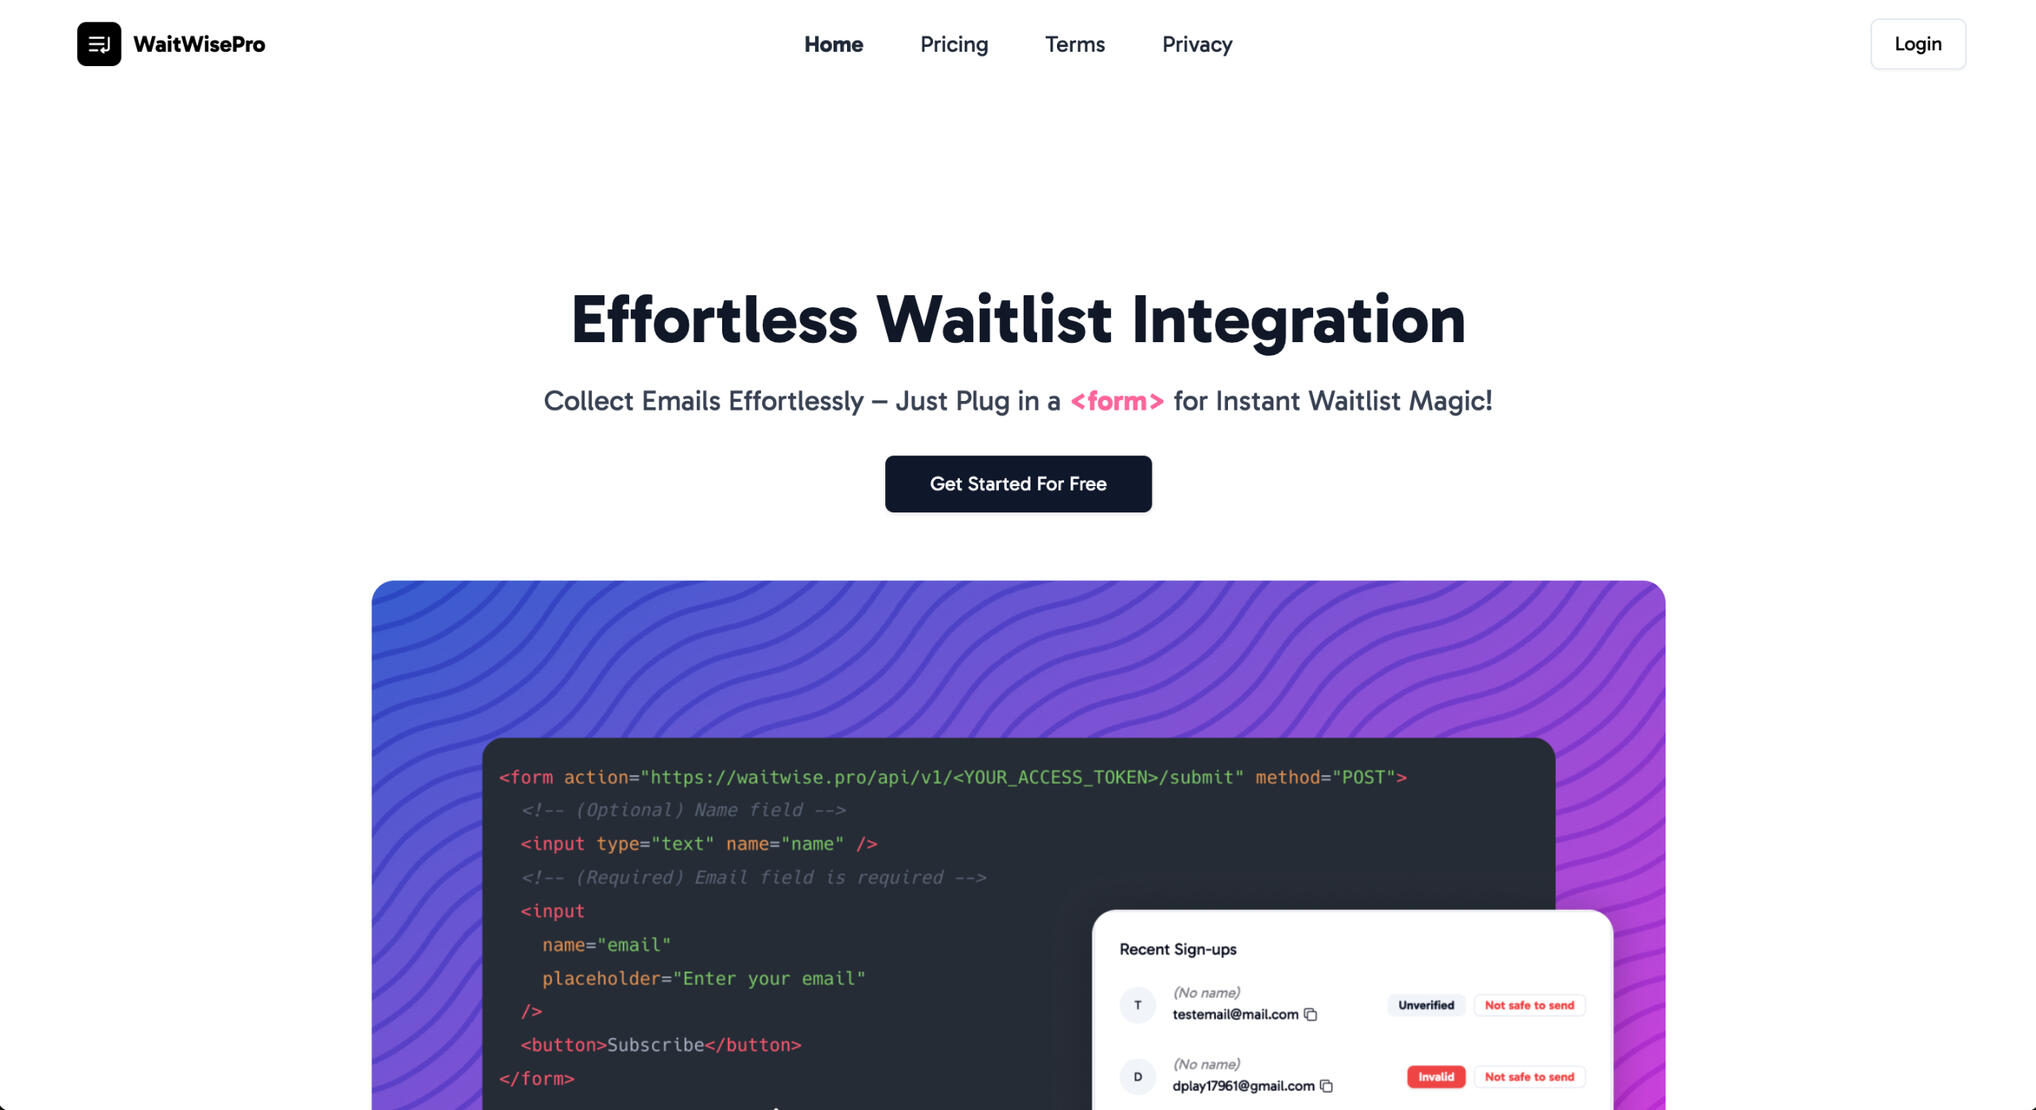 waitwise.pro landing page